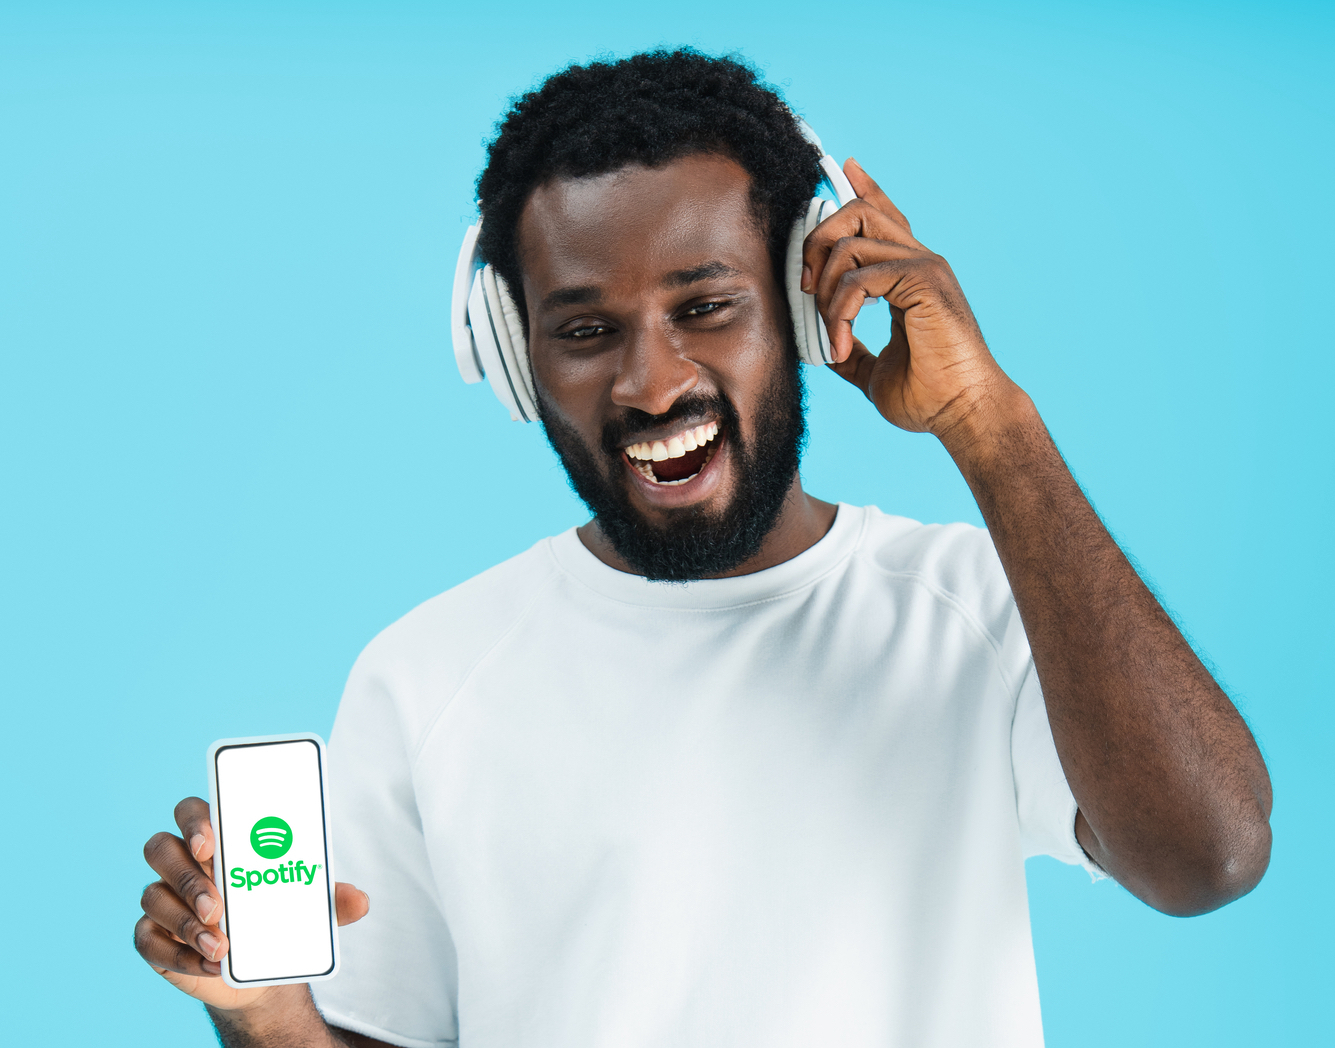 Spotify Expands to Jamaica